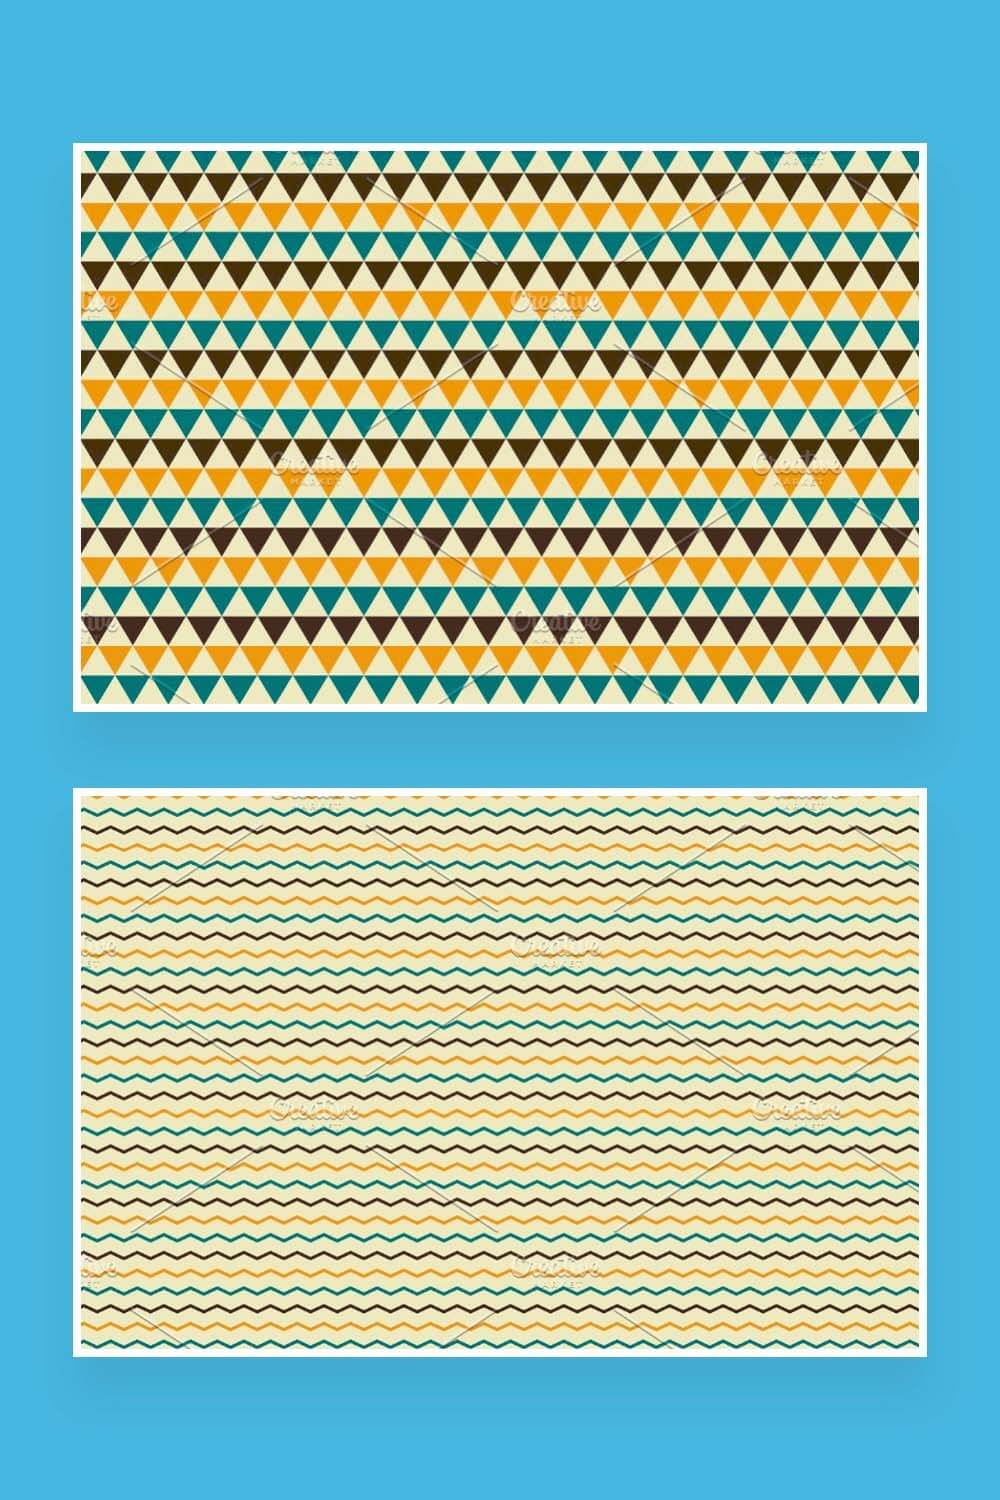 Two patterns with retro patterns on a turquoise background for pinterest.